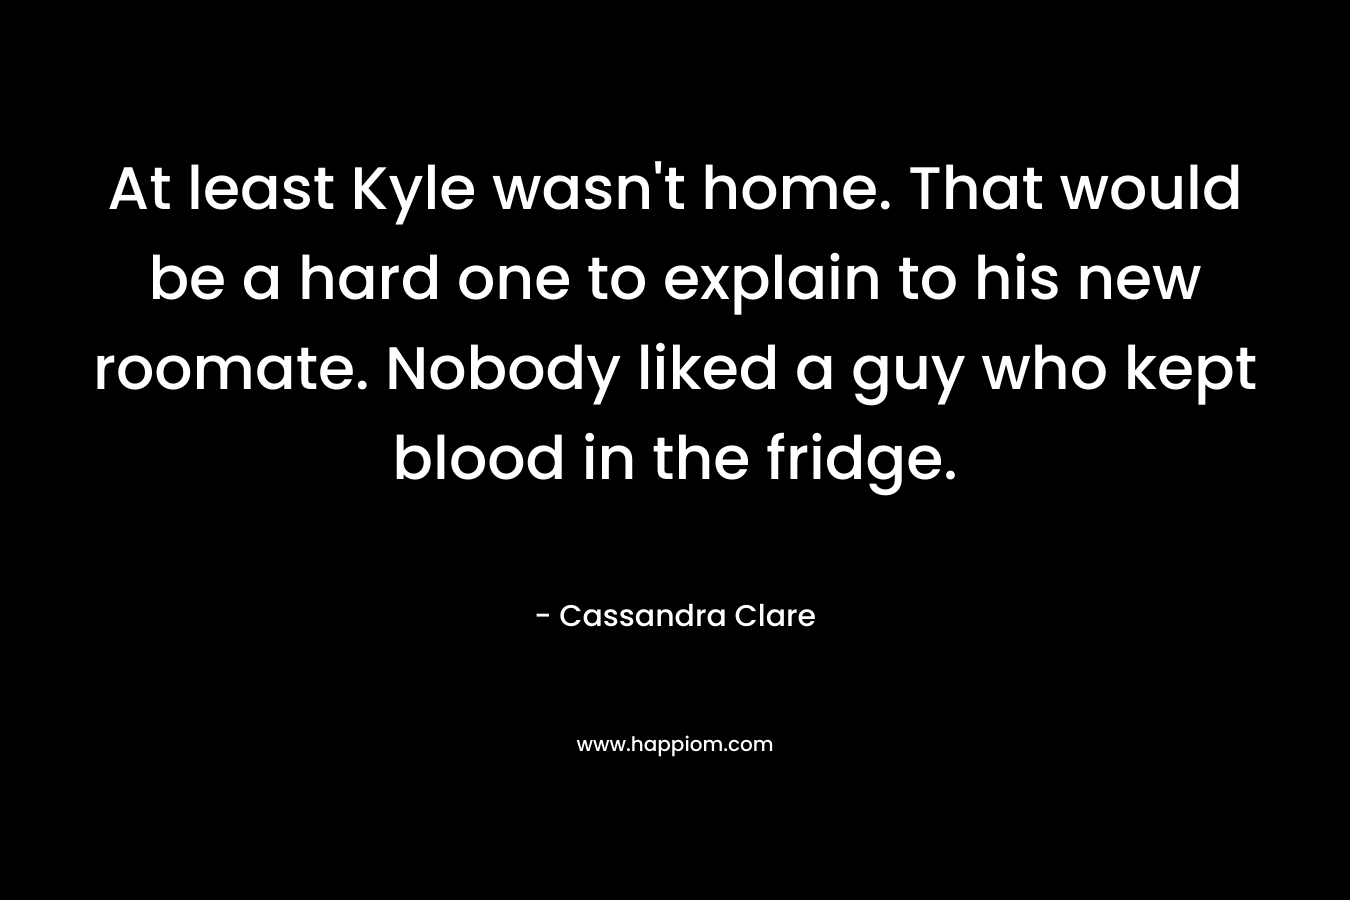 At least Kyle wasn’t home. That would be a hard one to explain to his new roomate. Nobody liked a guy who kept blood in the fridge. – Cassandra Clare